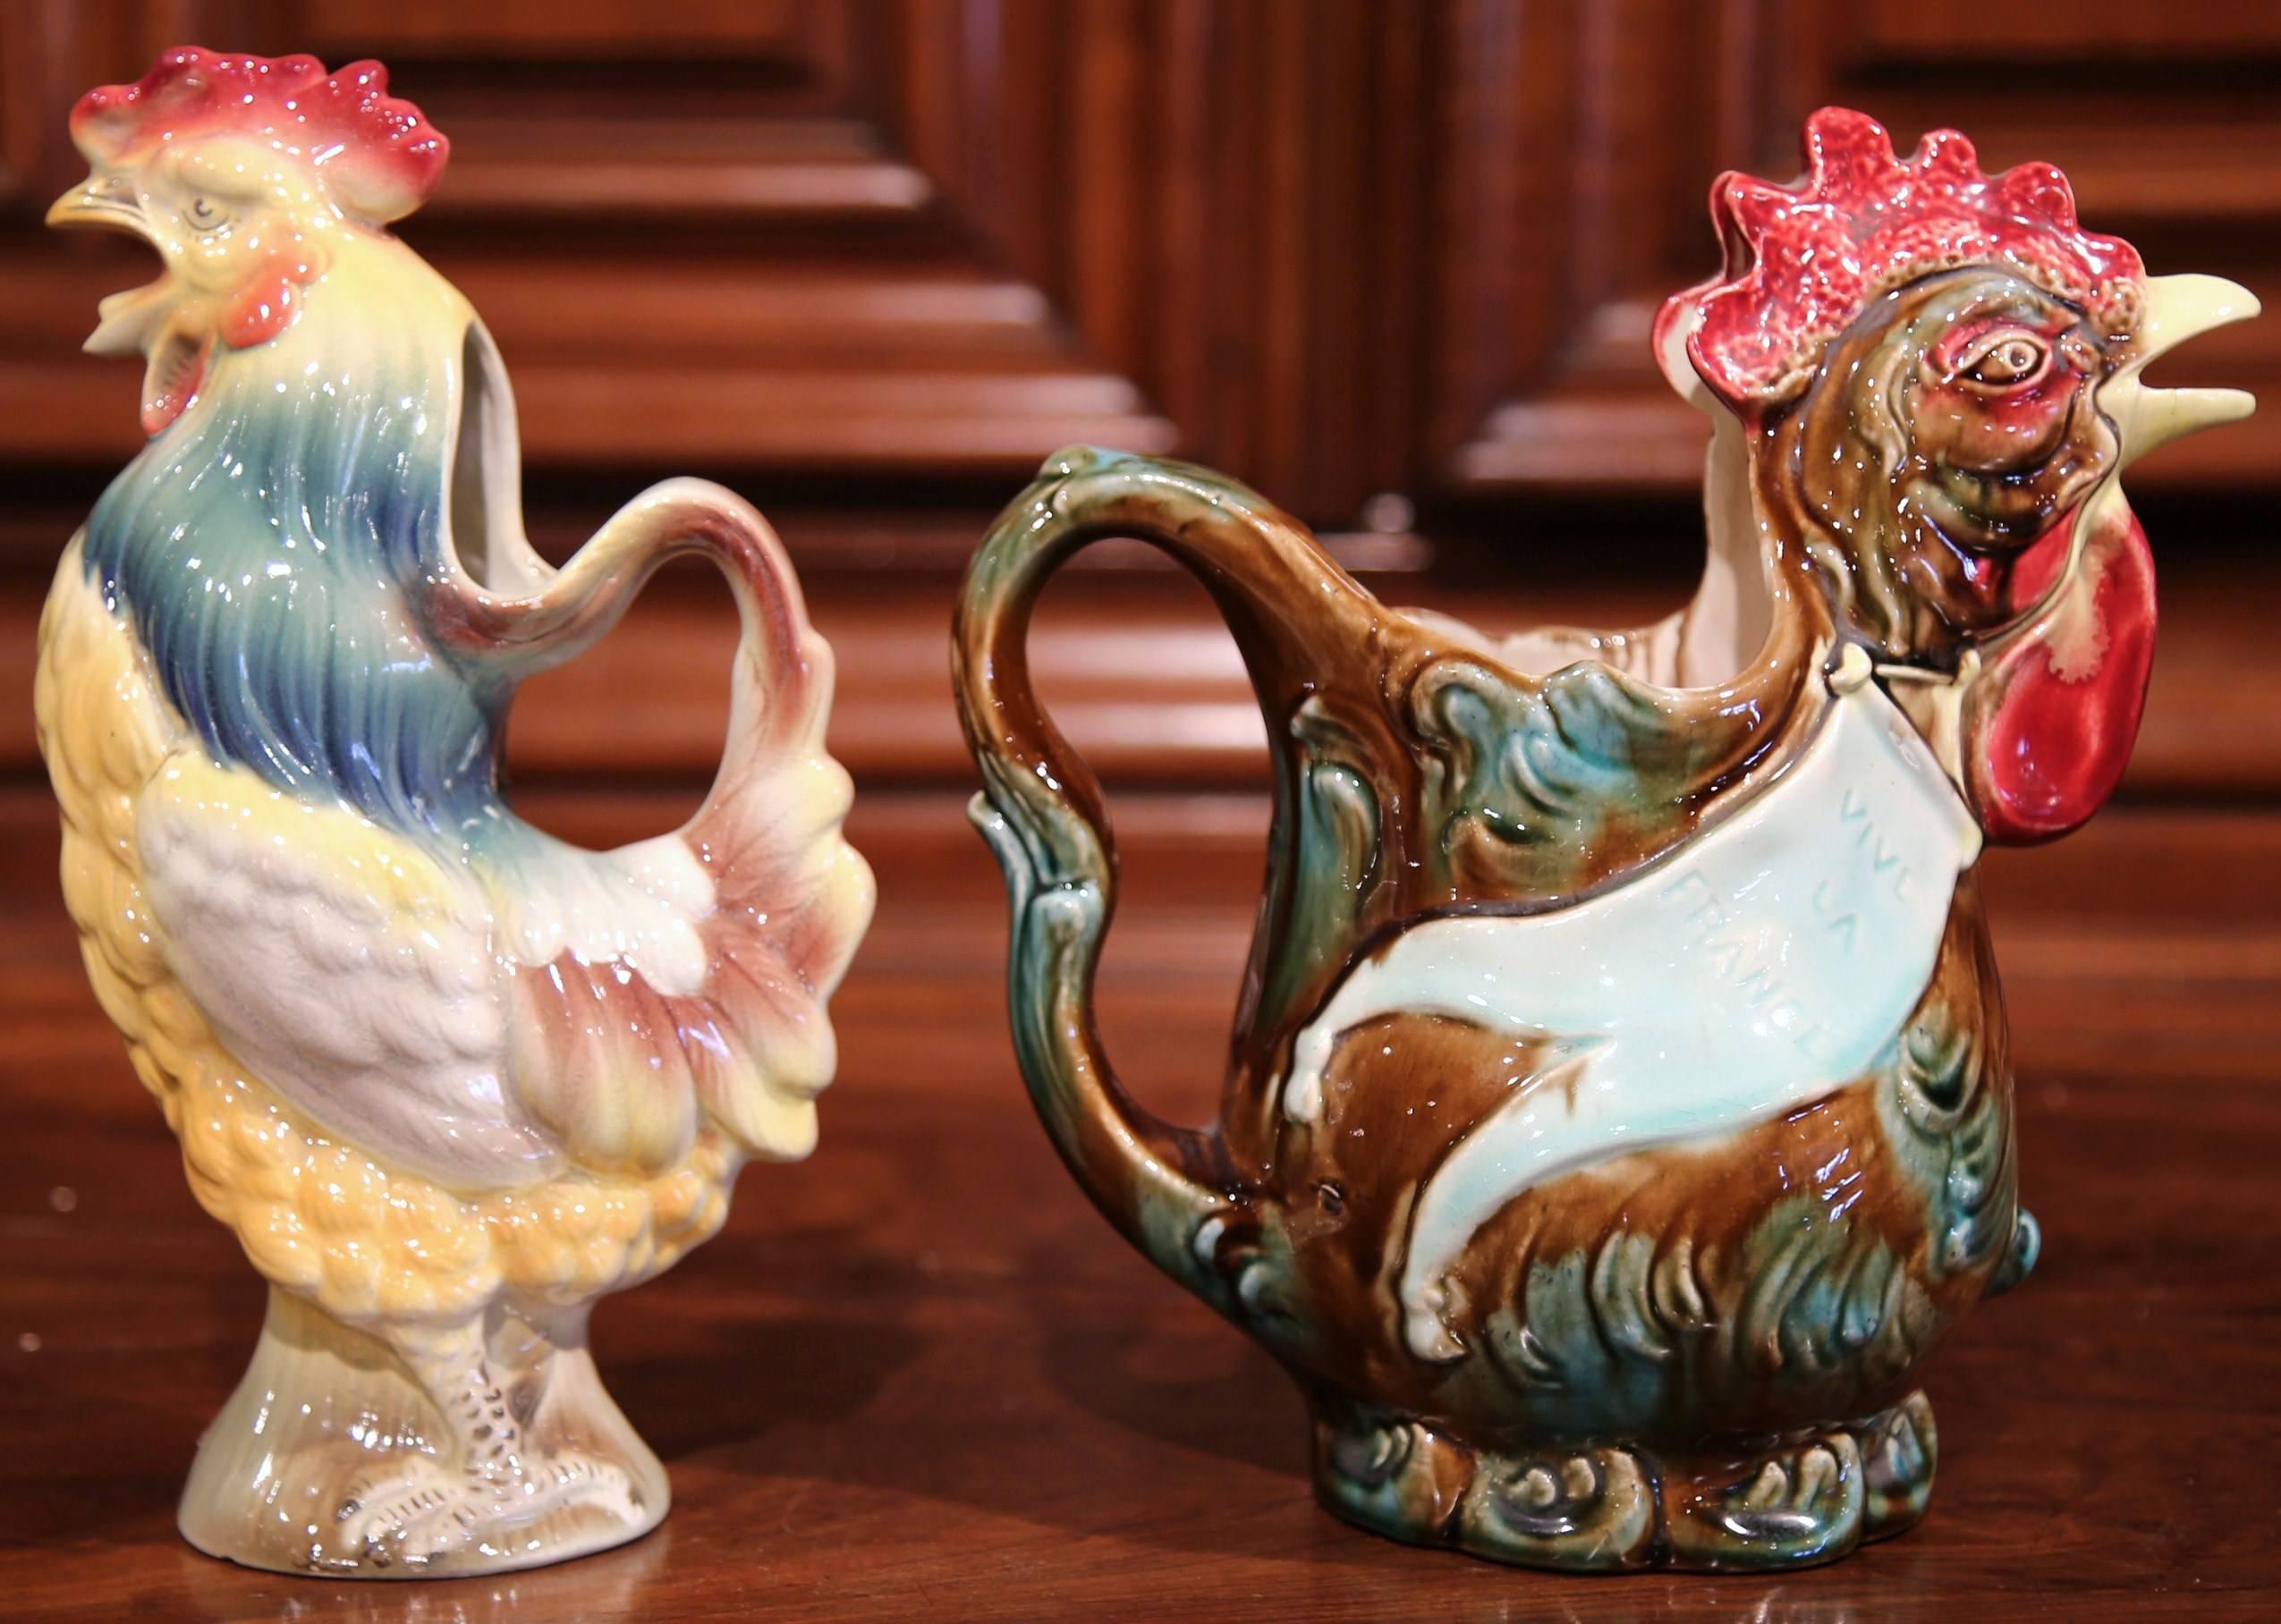 This set of two antique Majolica pitchers were sculpted in France, circa 1920. Each of the hand-painted, ceramic water jugs is in the shape of a colorful rooster with an open beak as a spout as well as a back handle for easy pouring. The larger